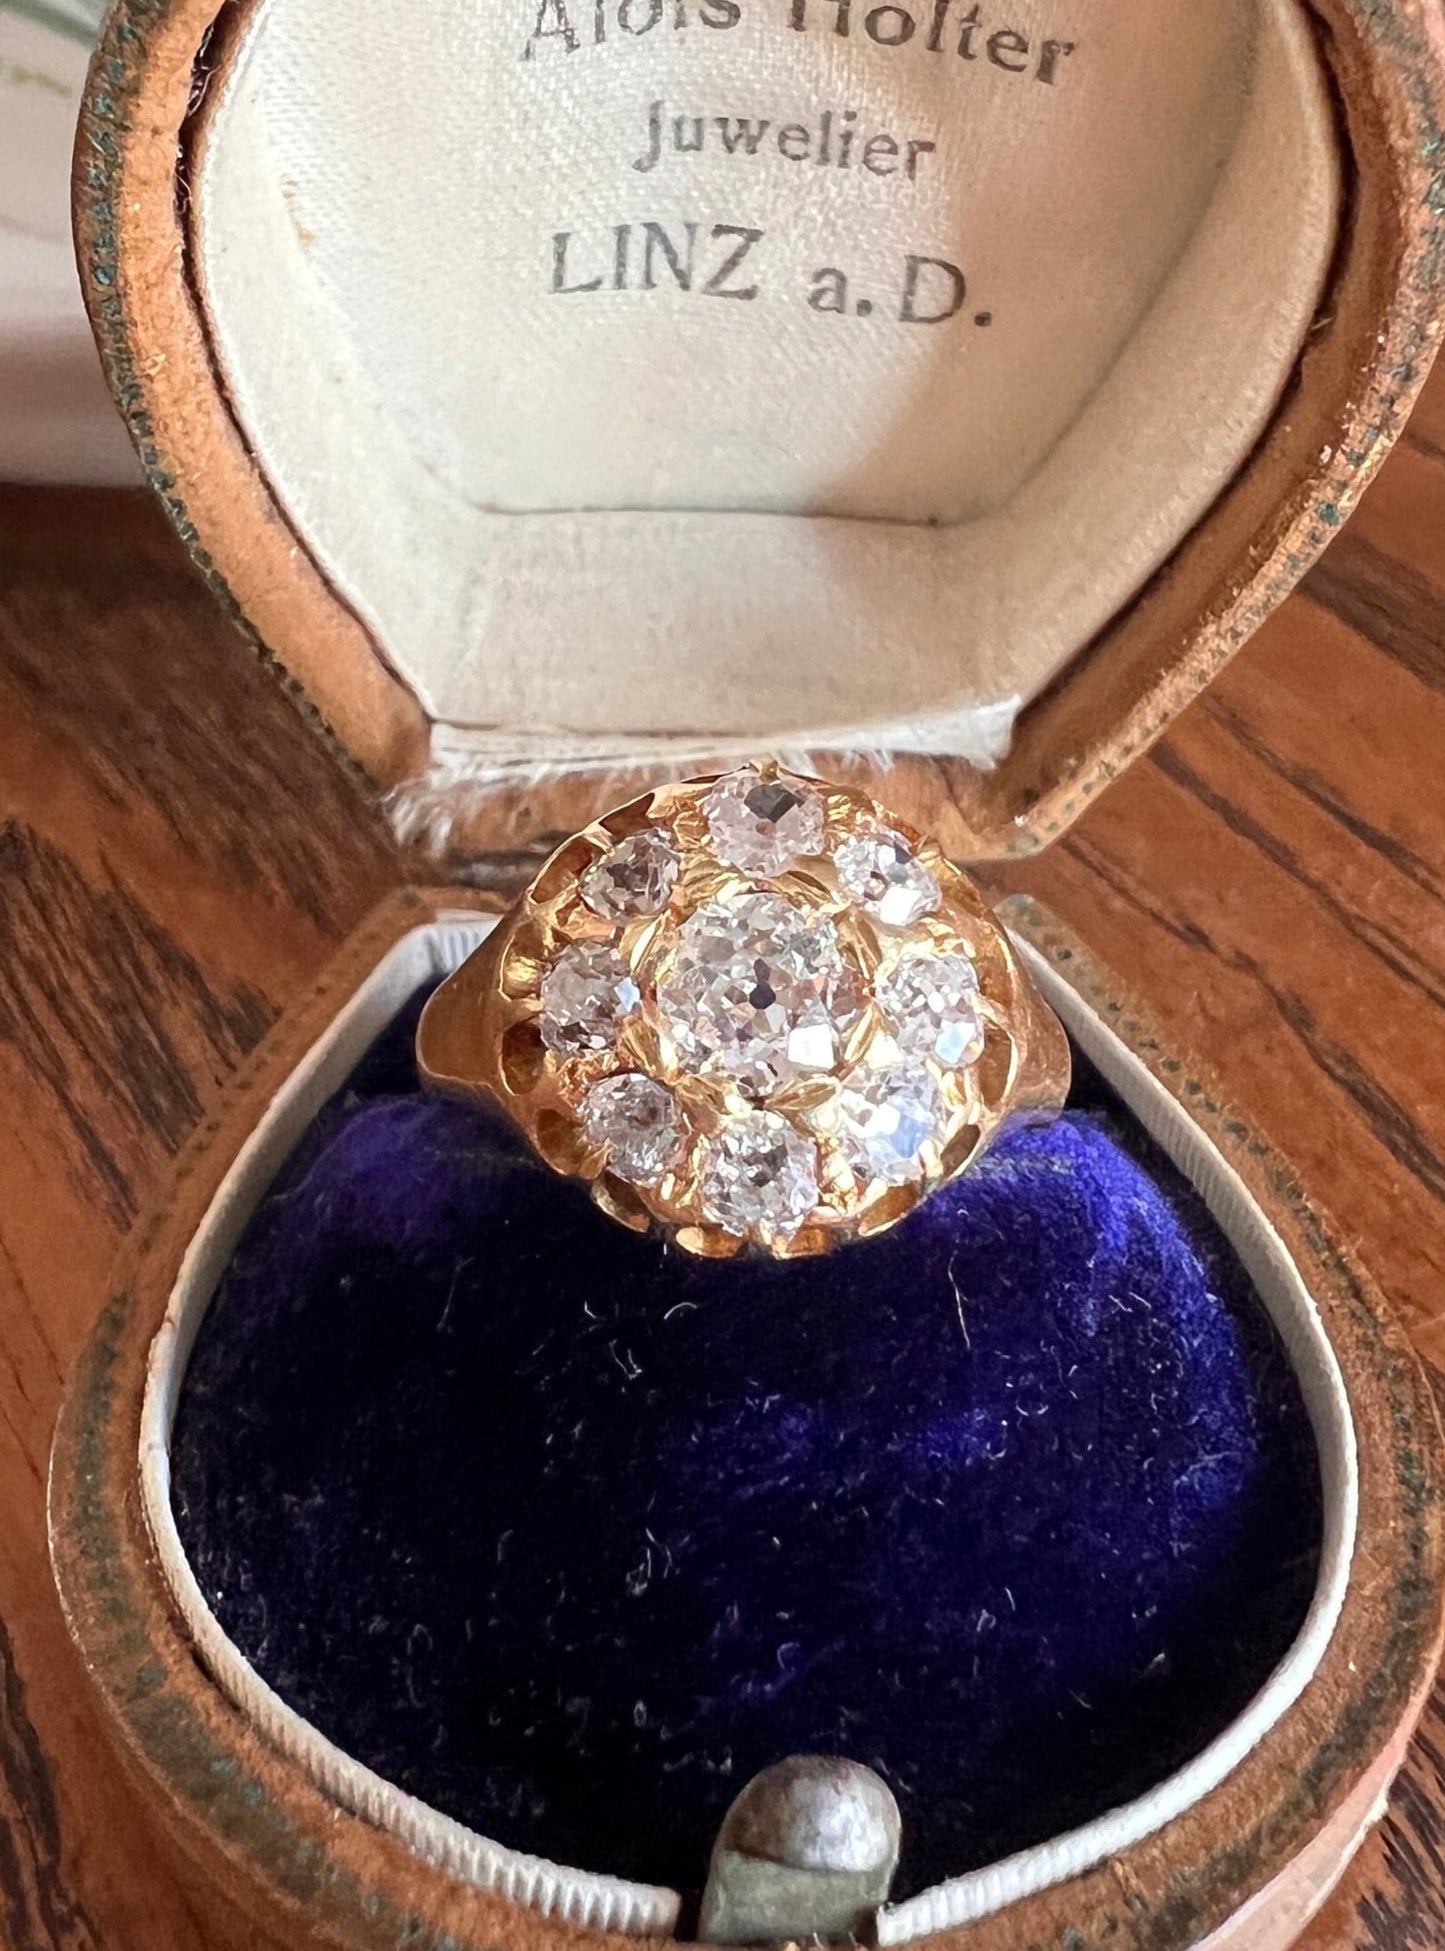 ANTIQUE 1.4 Carat 9 Old Mine Cut DIAMOND Cluster Ring 5.9g 18k Gold c1883 Romantic Gift Stacker Band OMC Victorian Halo Buttercup Belcher